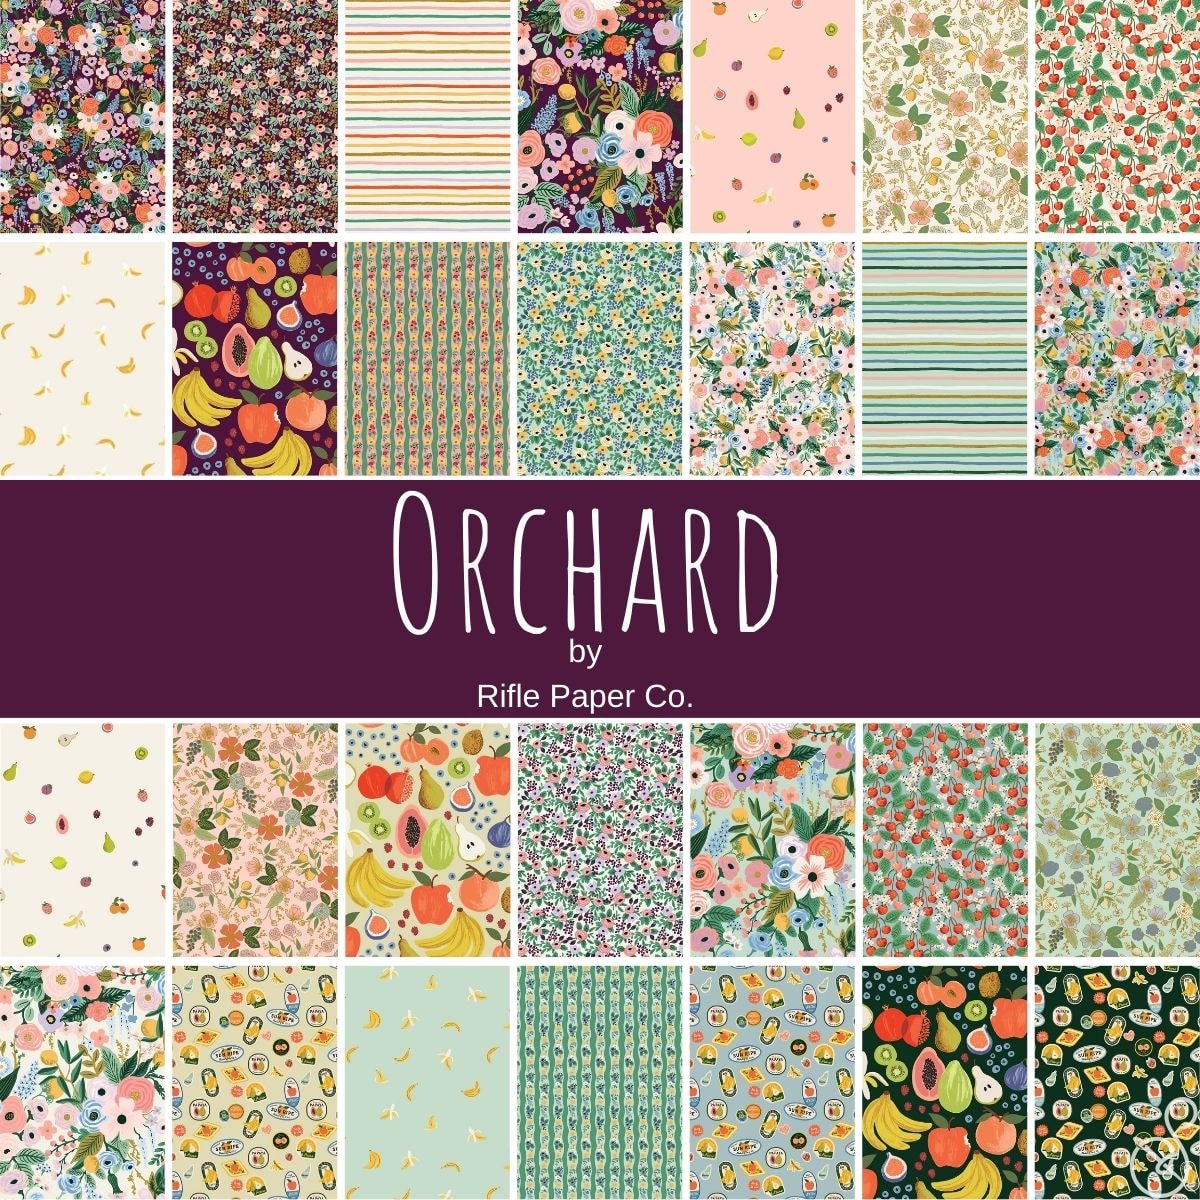 Orchard | Rifle Paper Co.